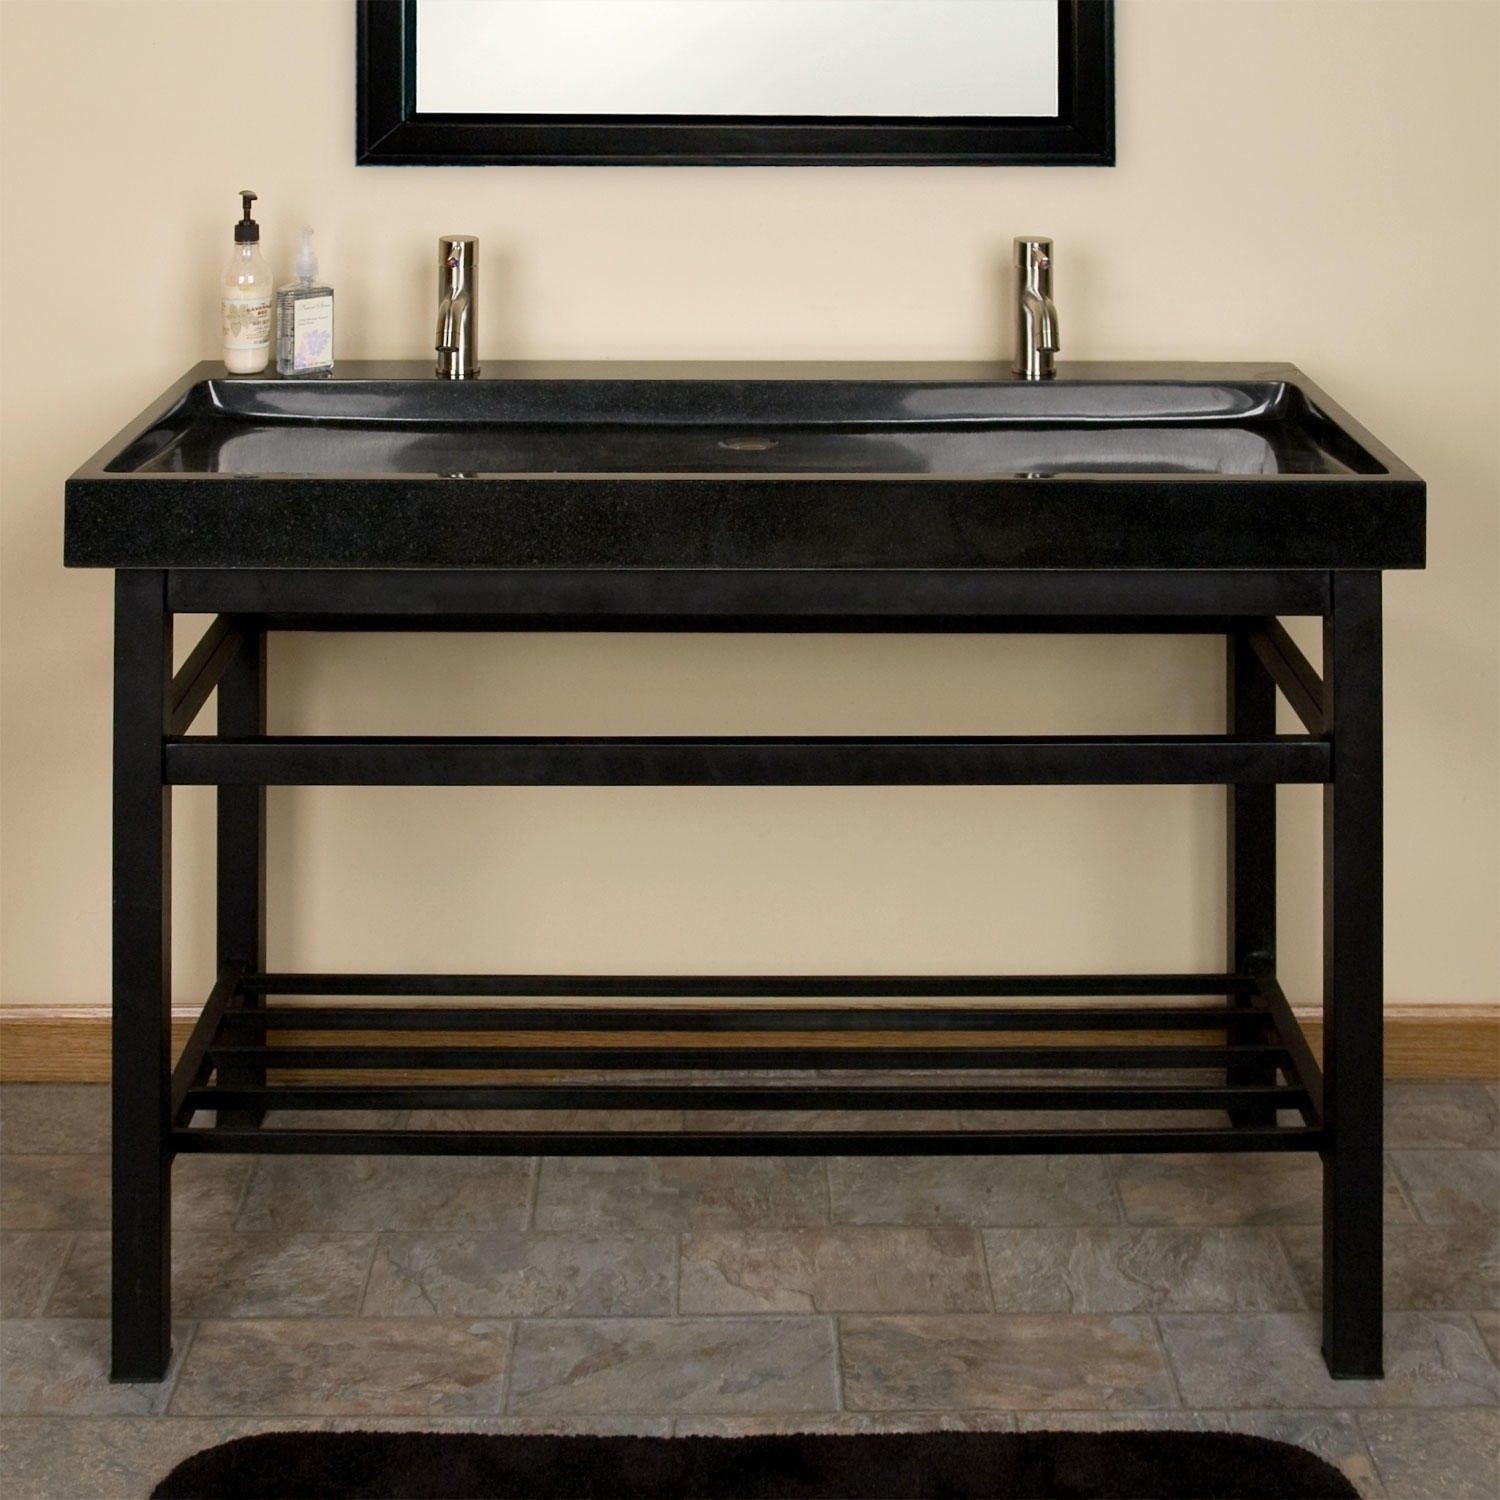 Details about 48 modern console sink with stone trough sink